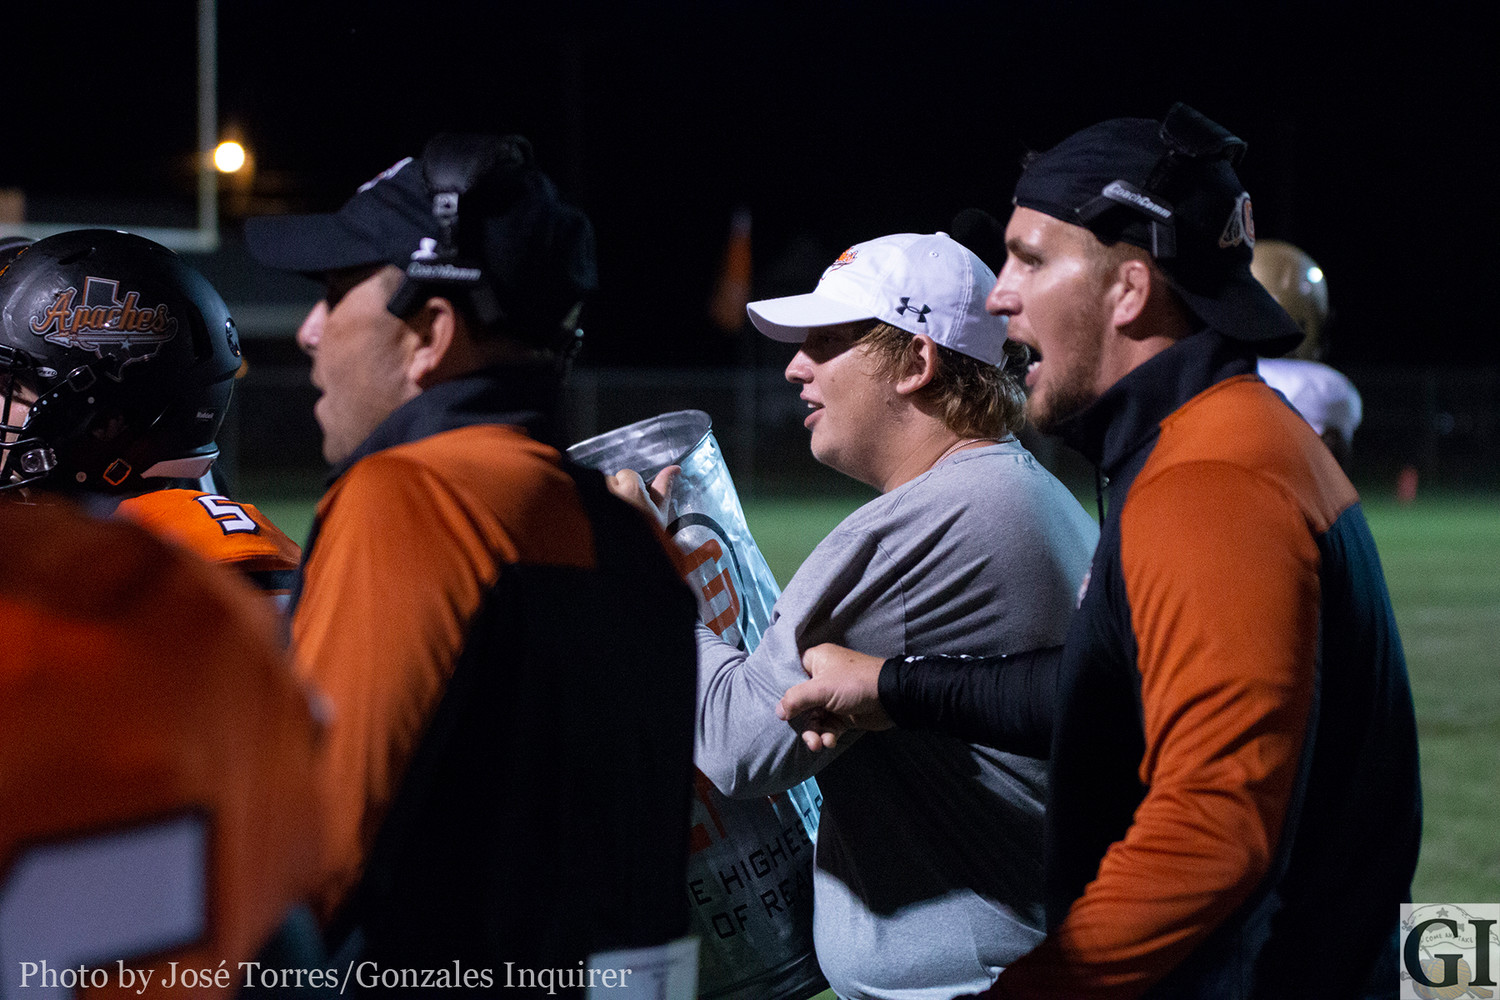 Trent Wilkerson turned to "Coach Wilkerson" Friday night. An injury forced the senior defensive tackle to use his talents to be another coach for the team. The Apaches would win 42-8 over Austin Crockett.